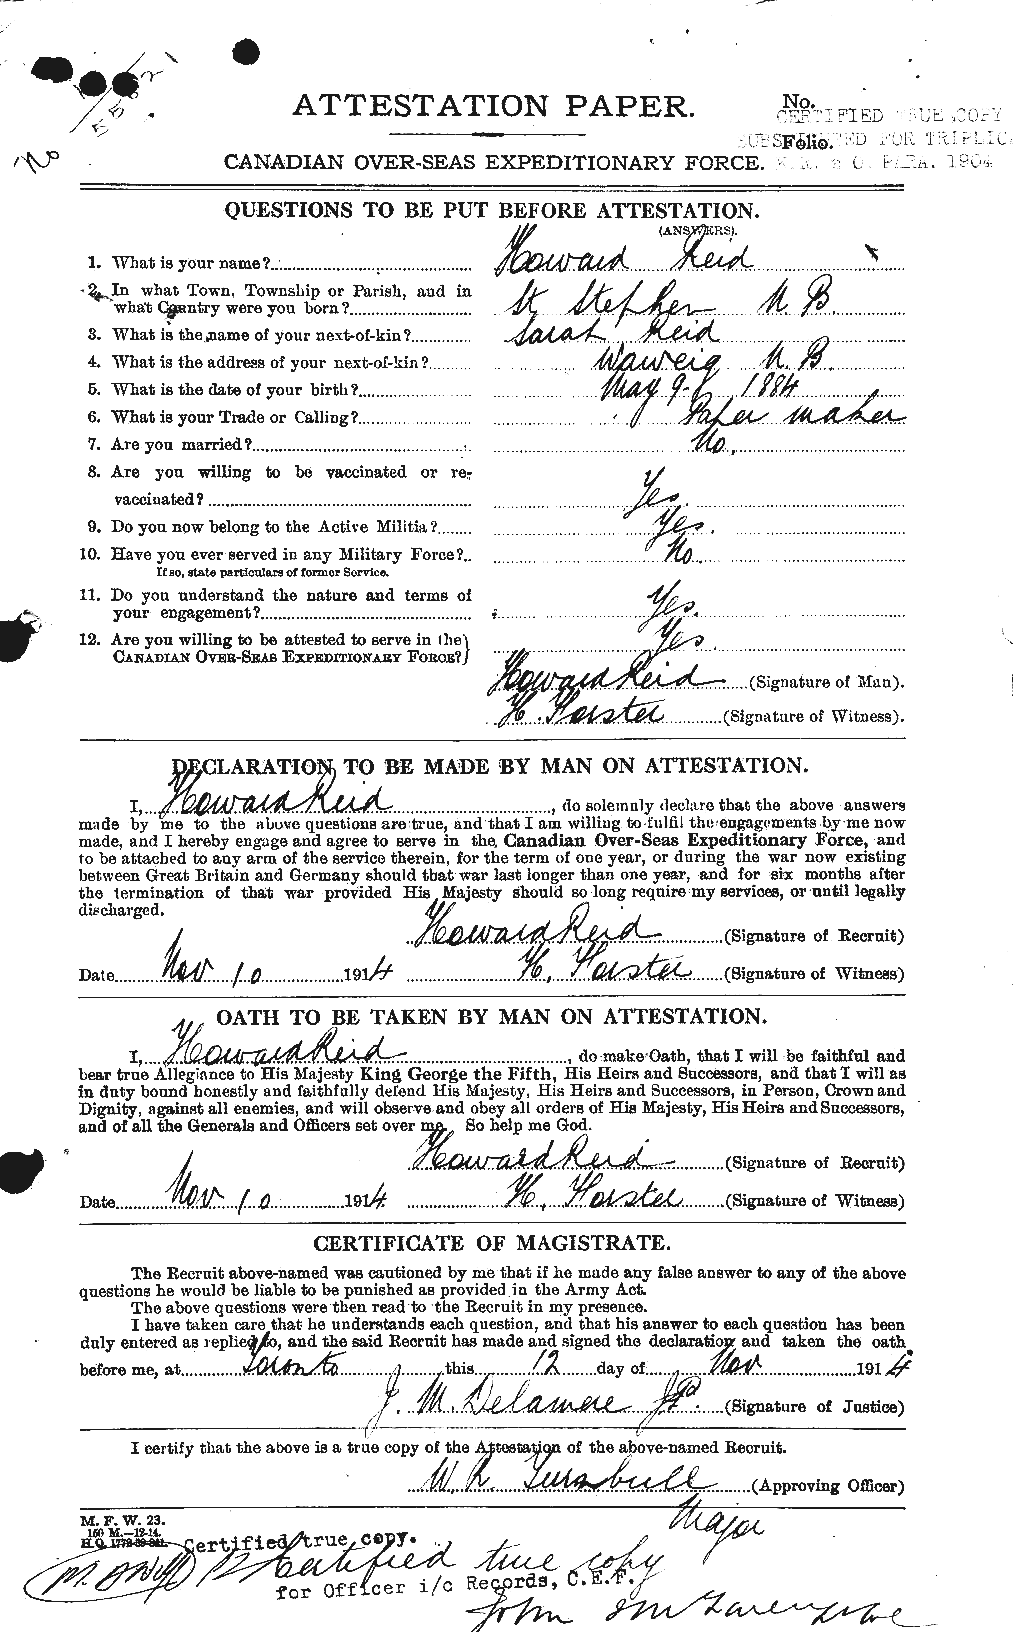 Personnel Records of the First World War - CEF 598618a